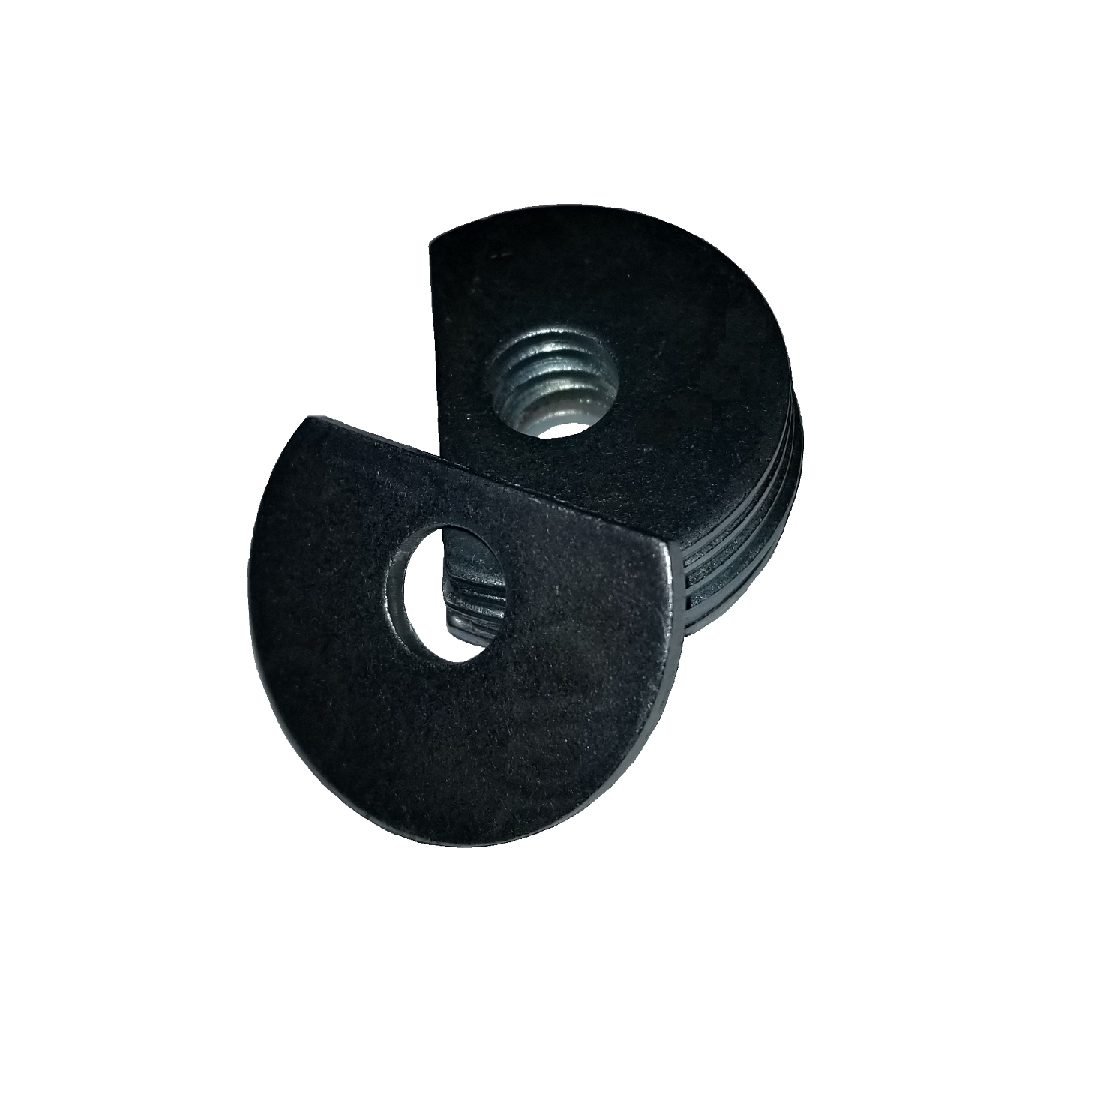 Clipped OD Washer - 0.125 ID, 0.312 OD, 0.030 Thick, Low Carbon Steel - Soft